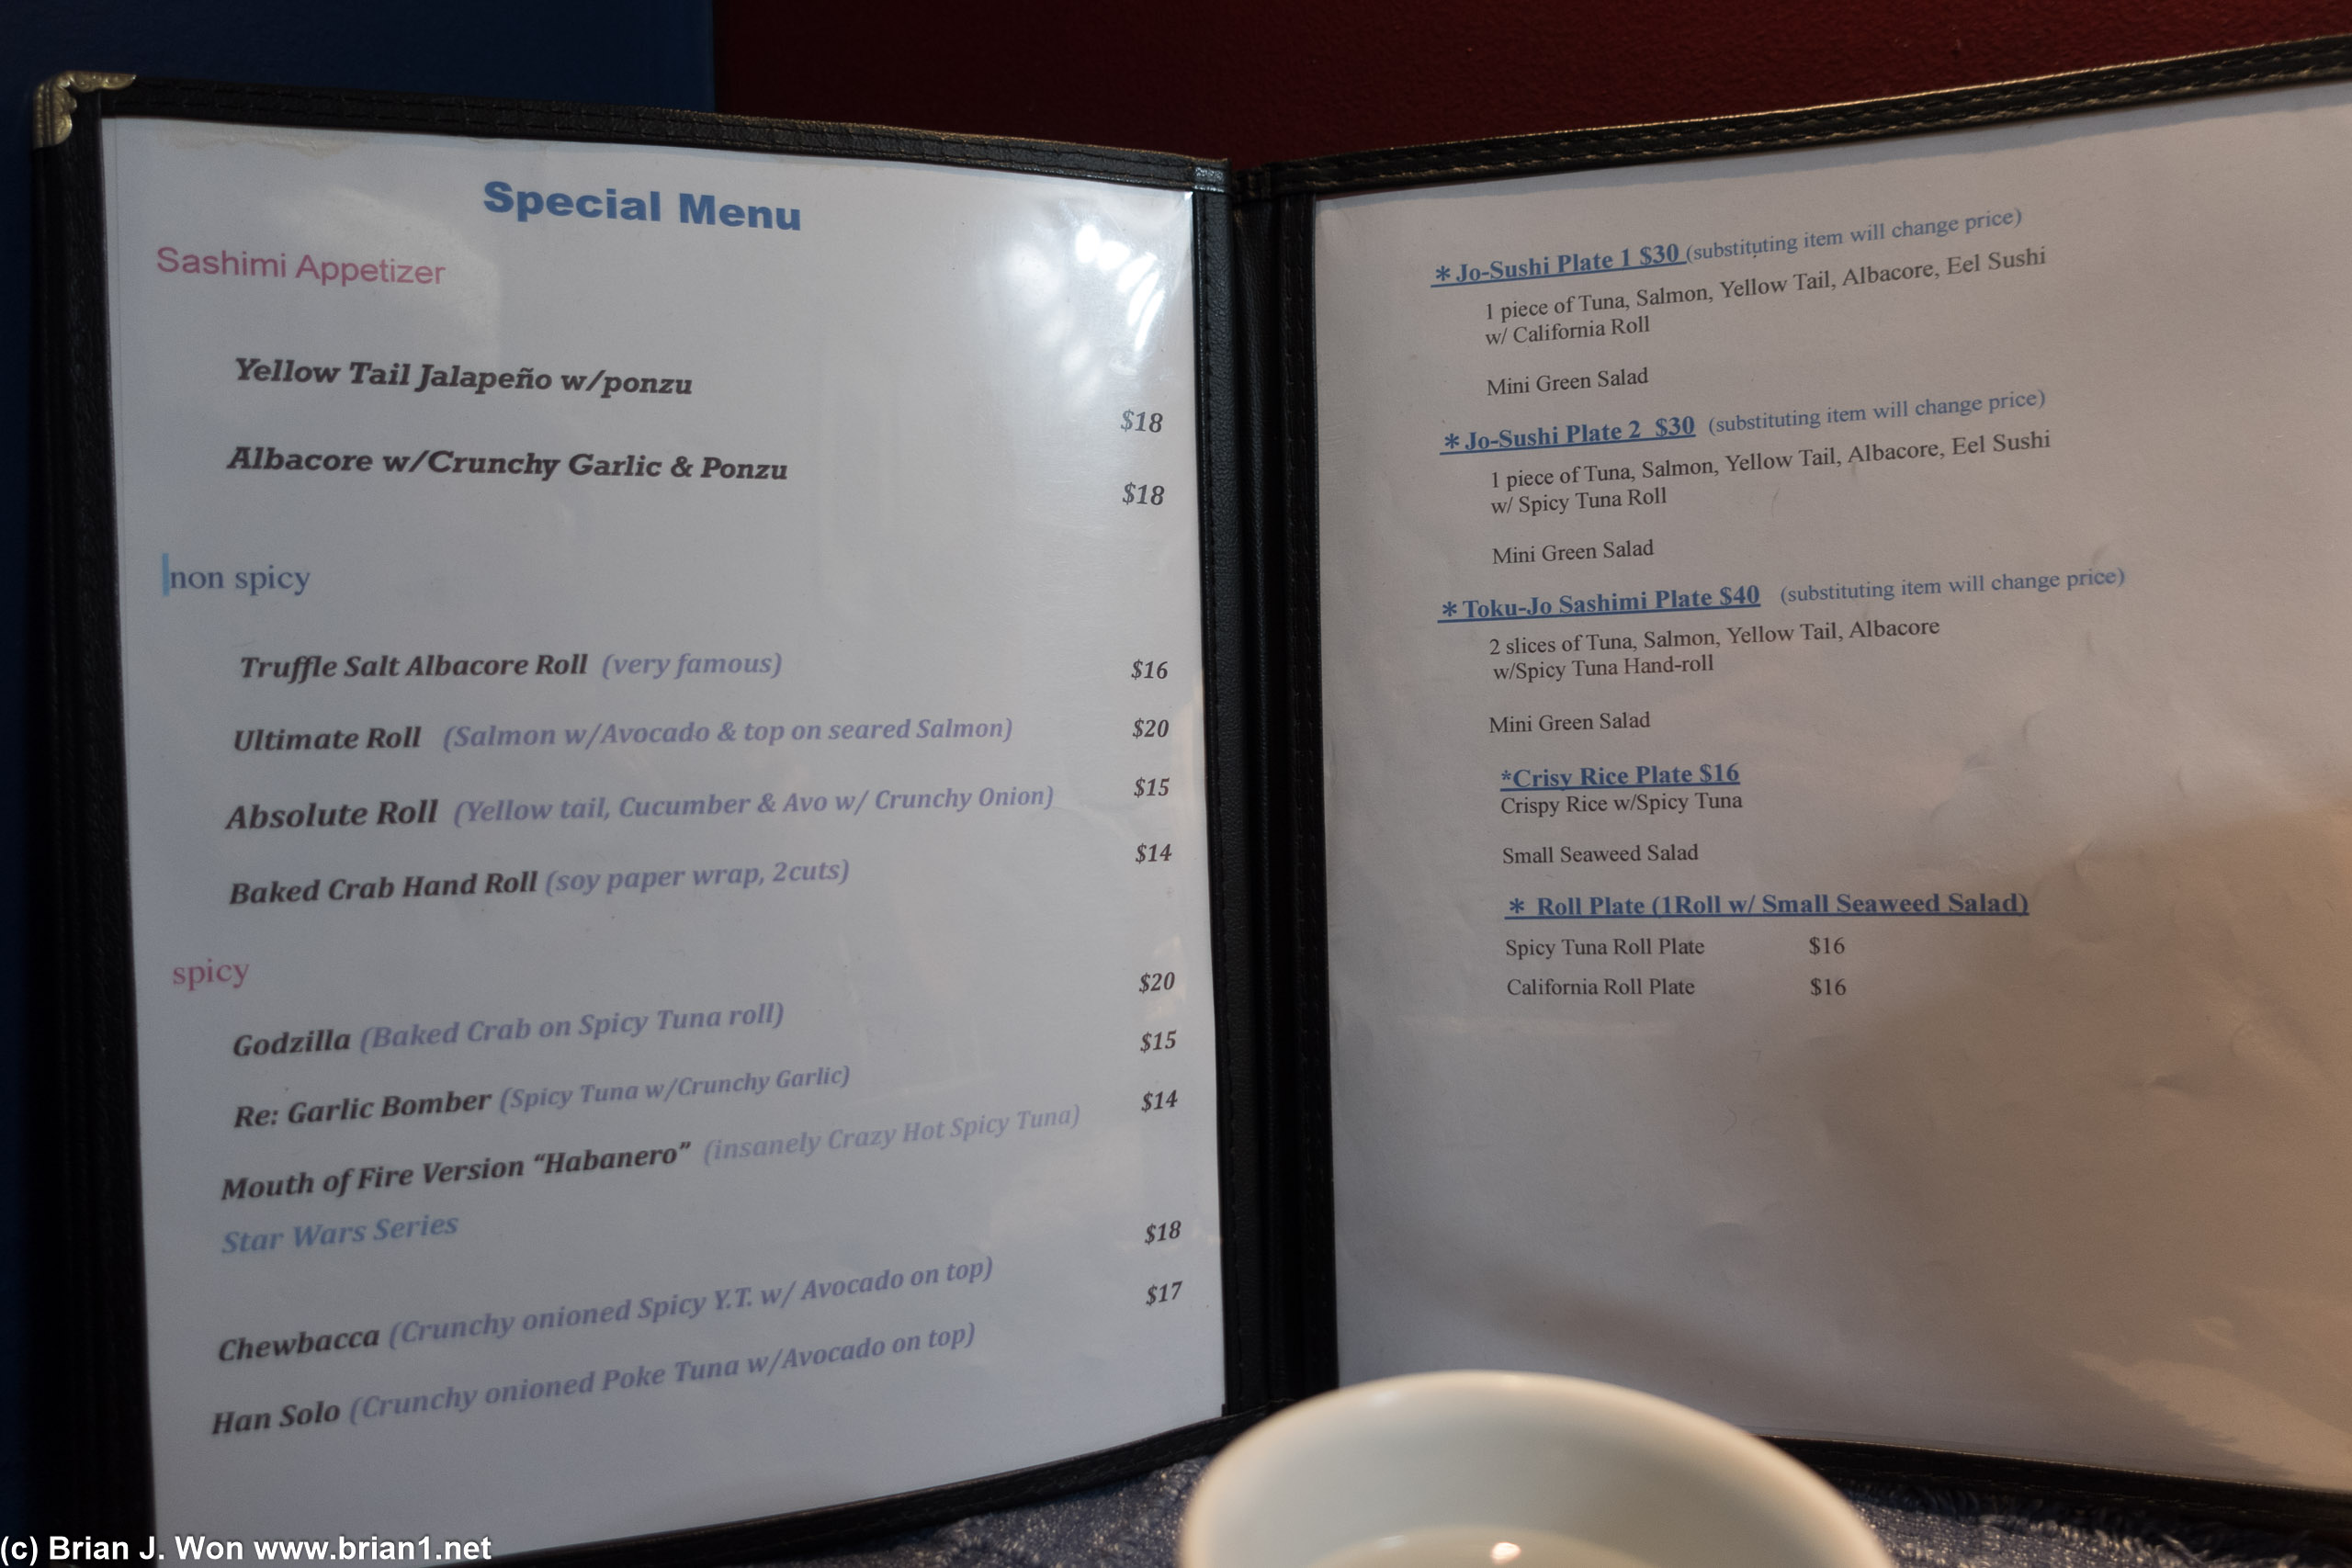 Pages 5 and 6 of the menu.